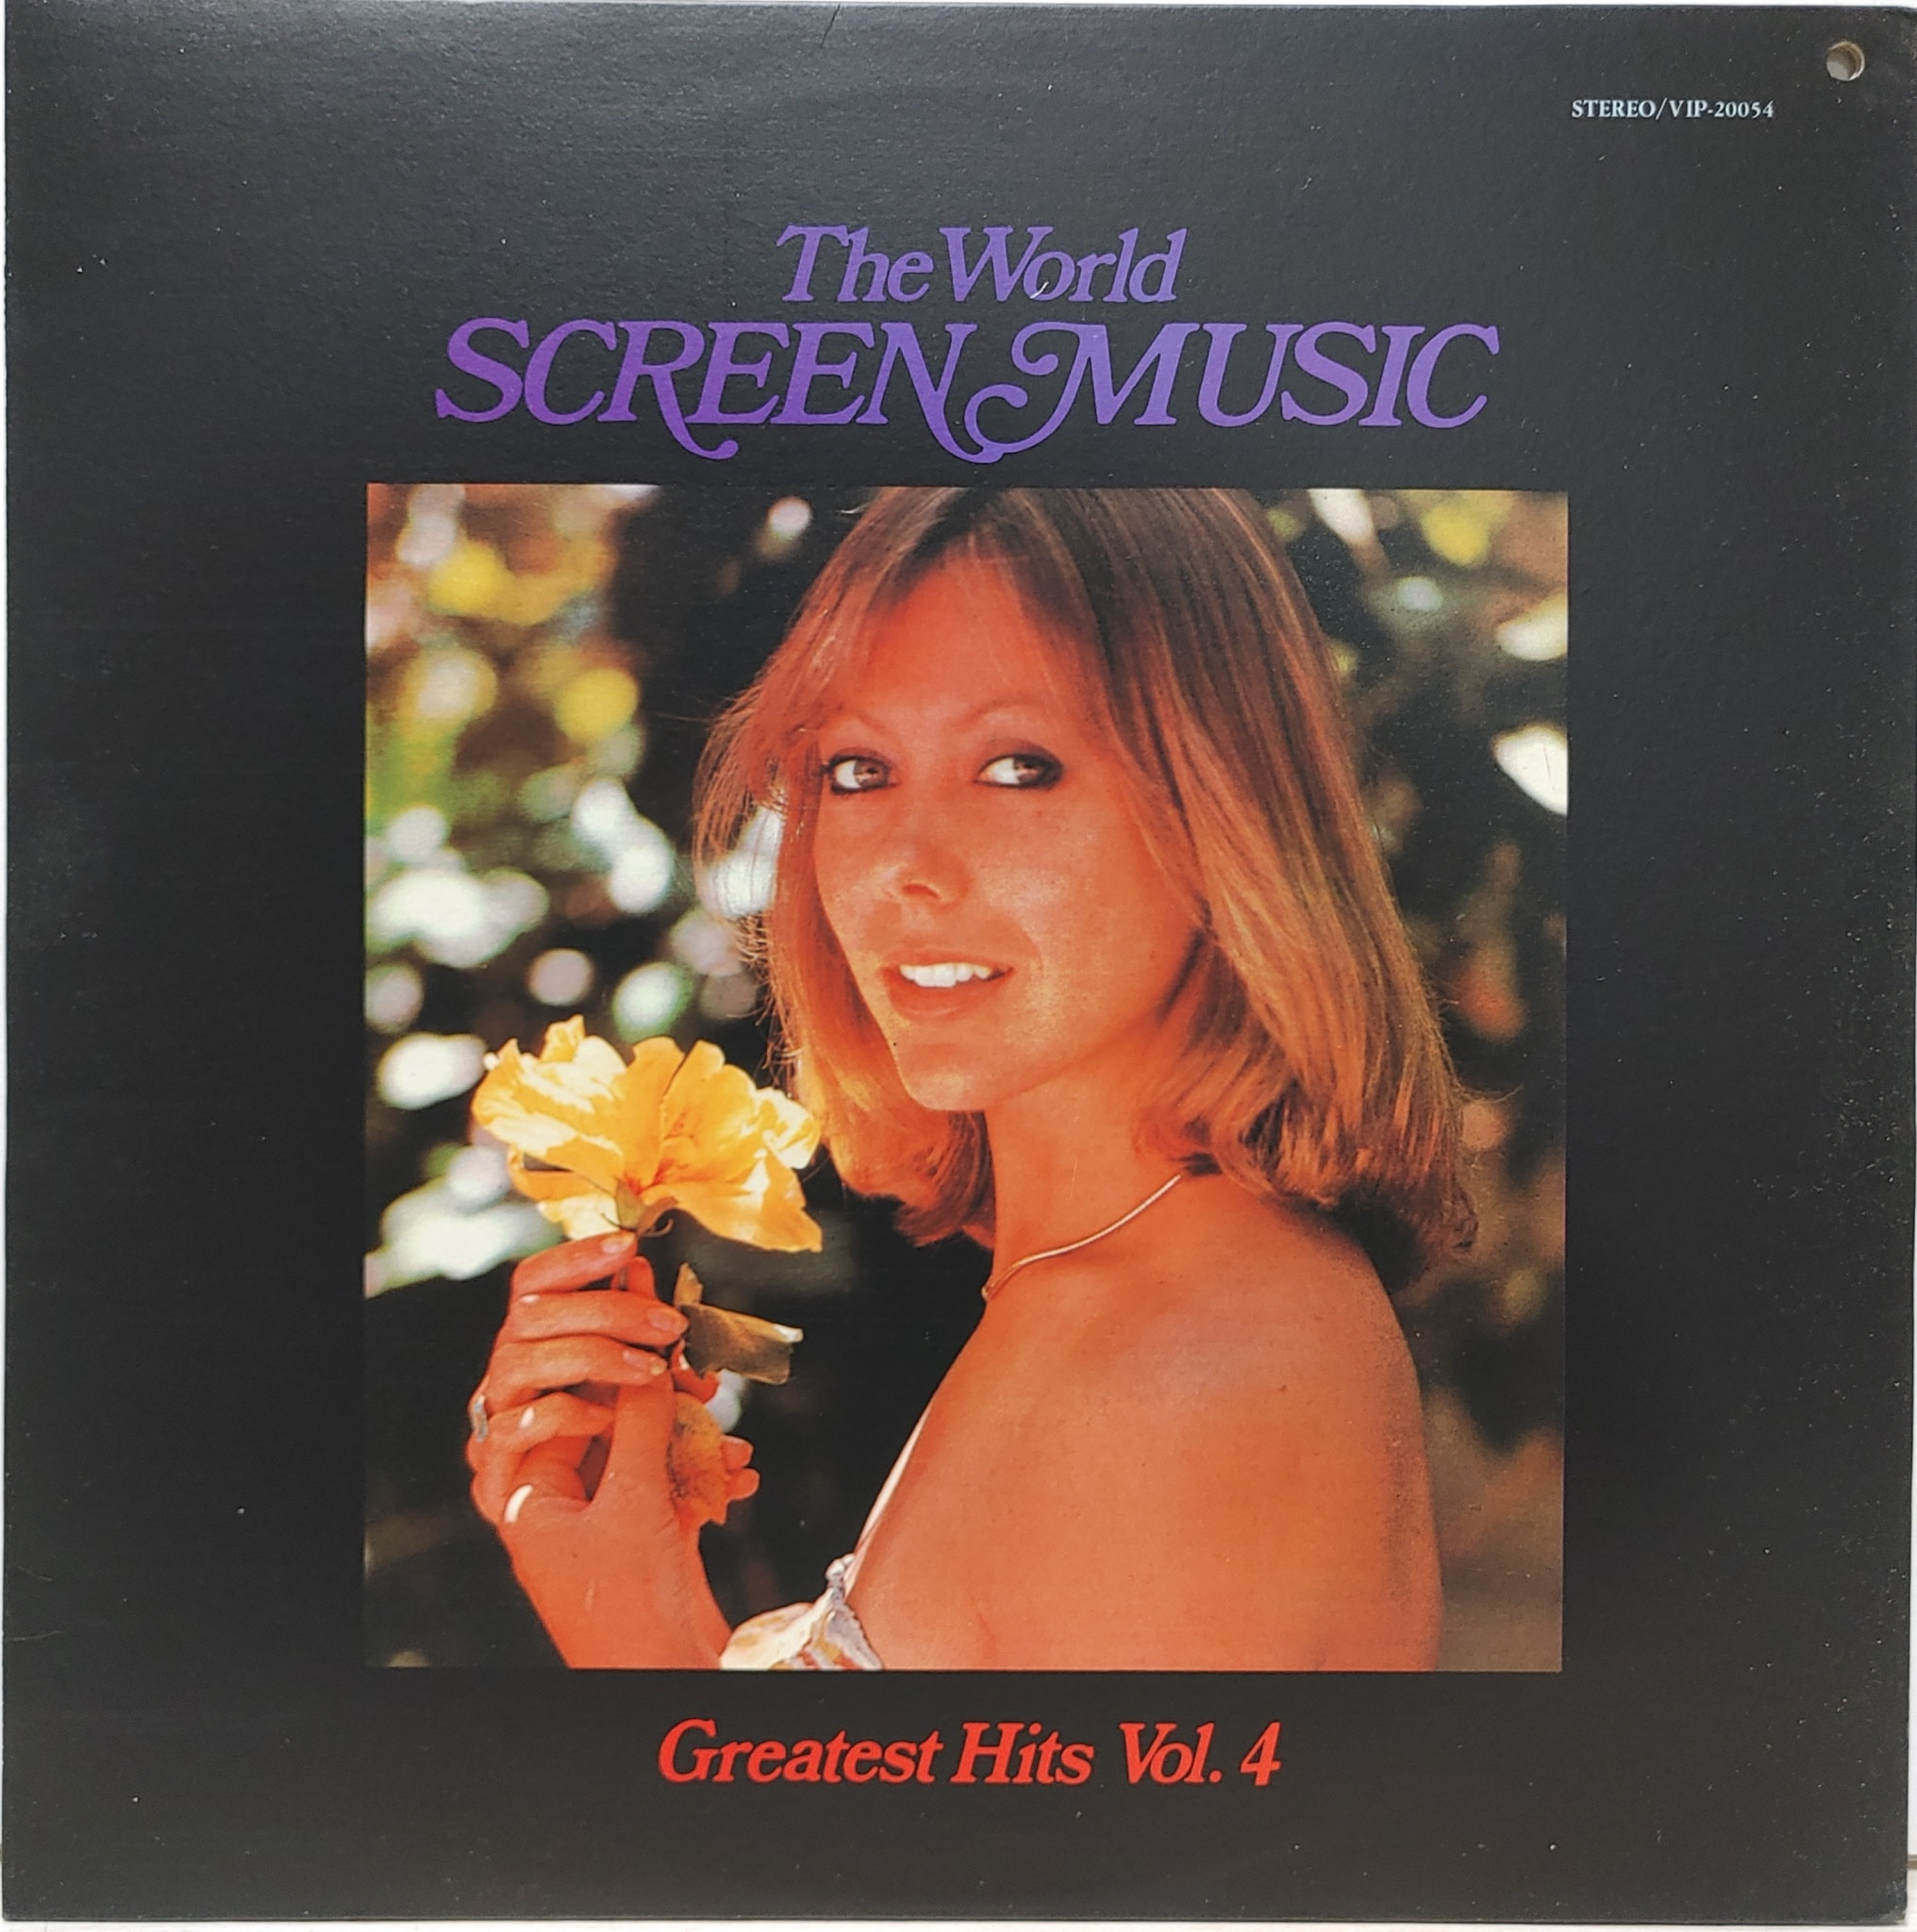 The World Screen Music Greatest Hits Vol. 4